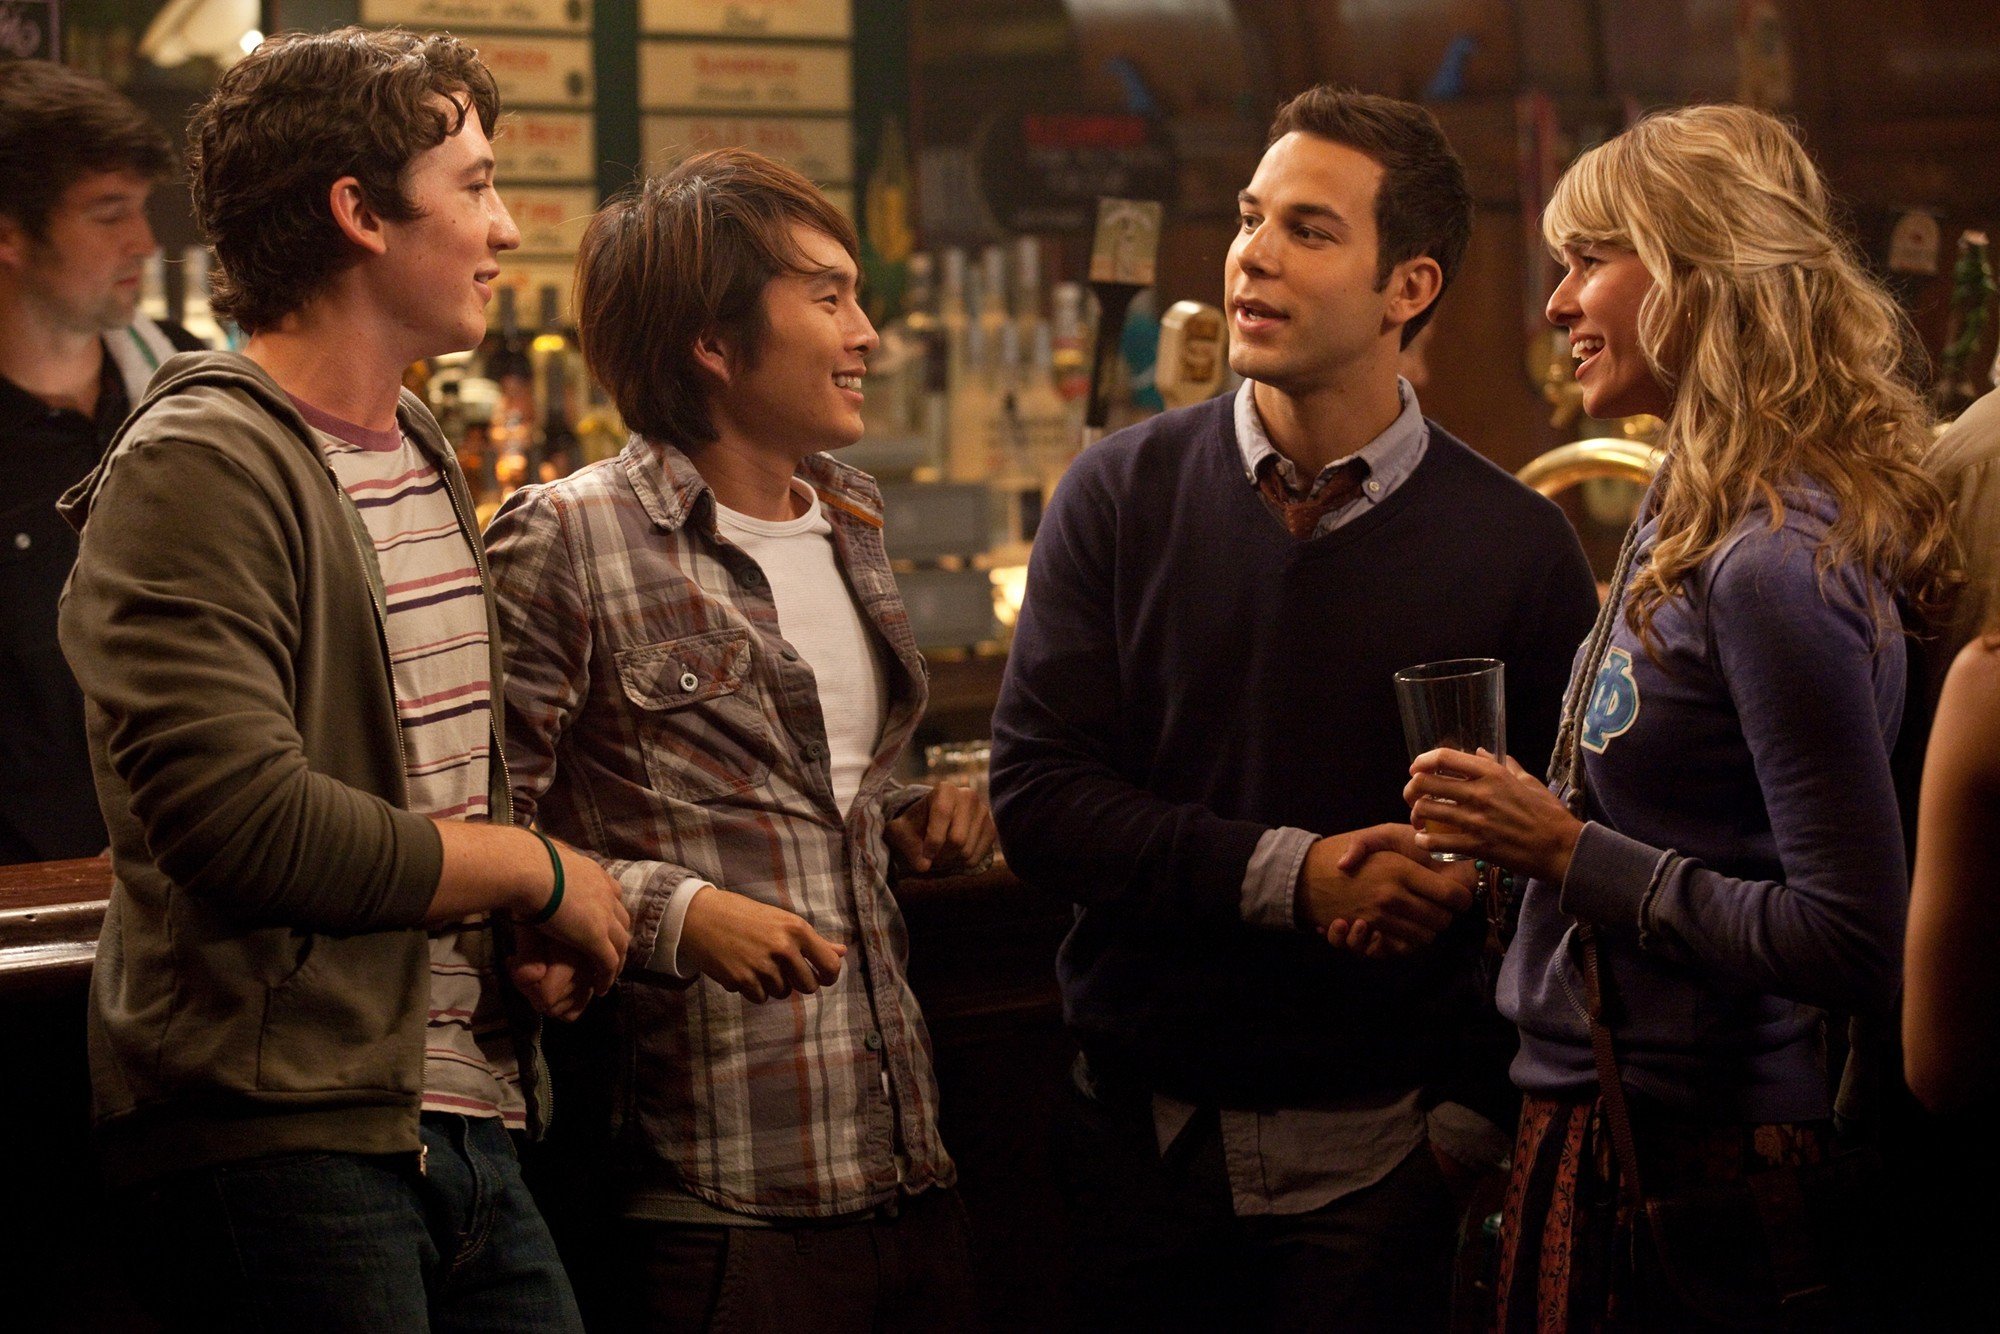 21 And Over